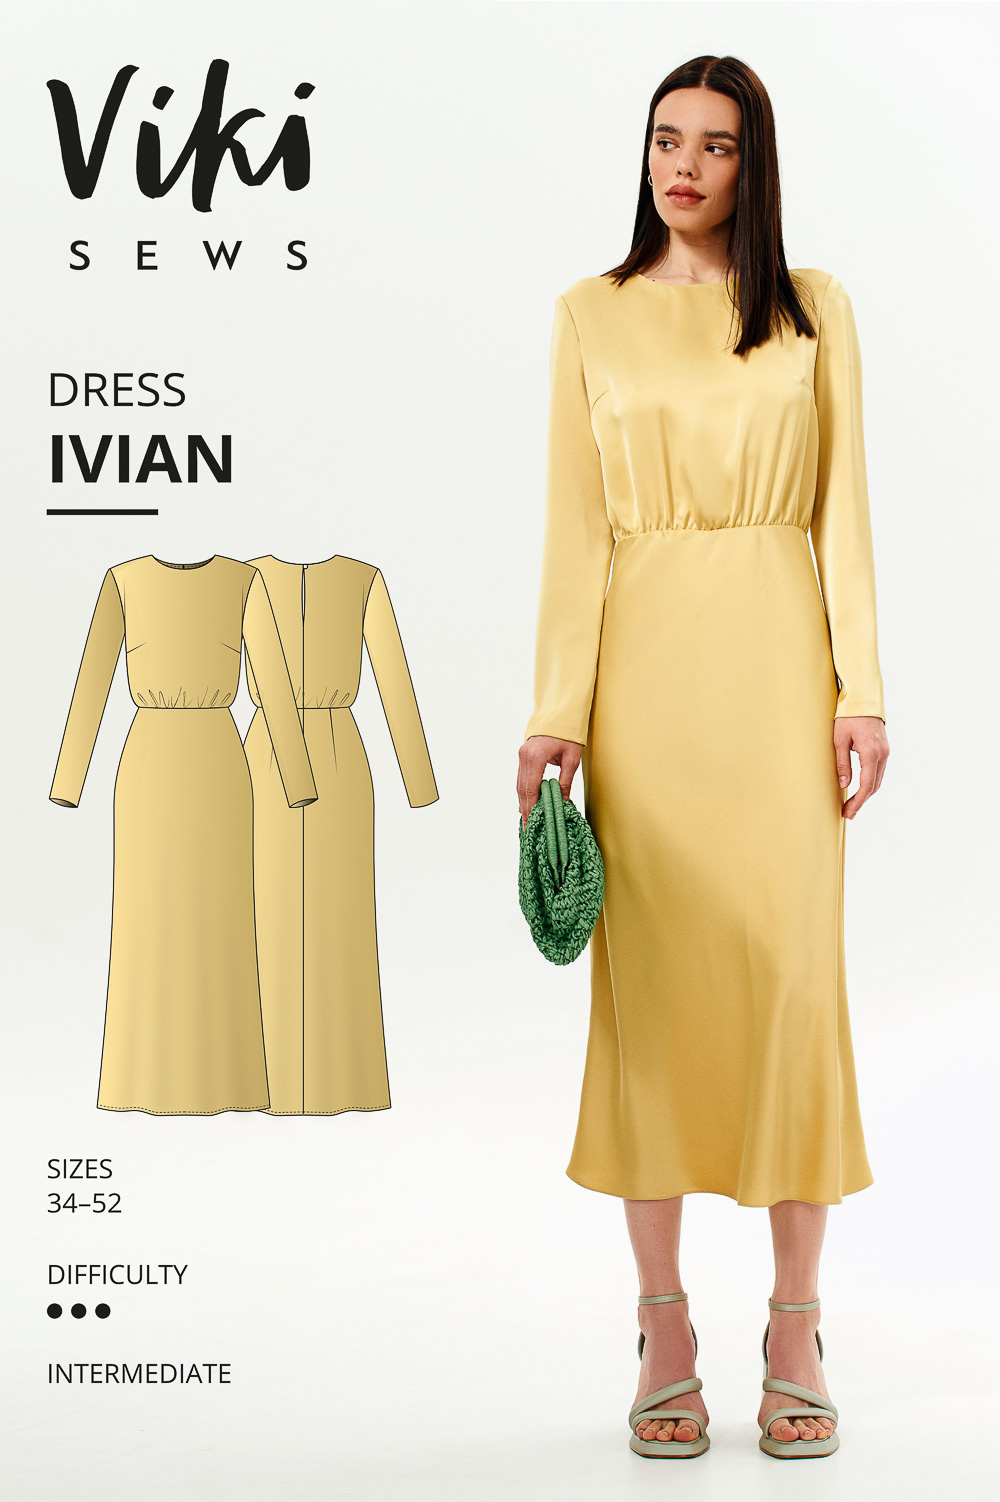 Sewing Inspiration From Autumn Trends '23
Vikisews Ivian dress